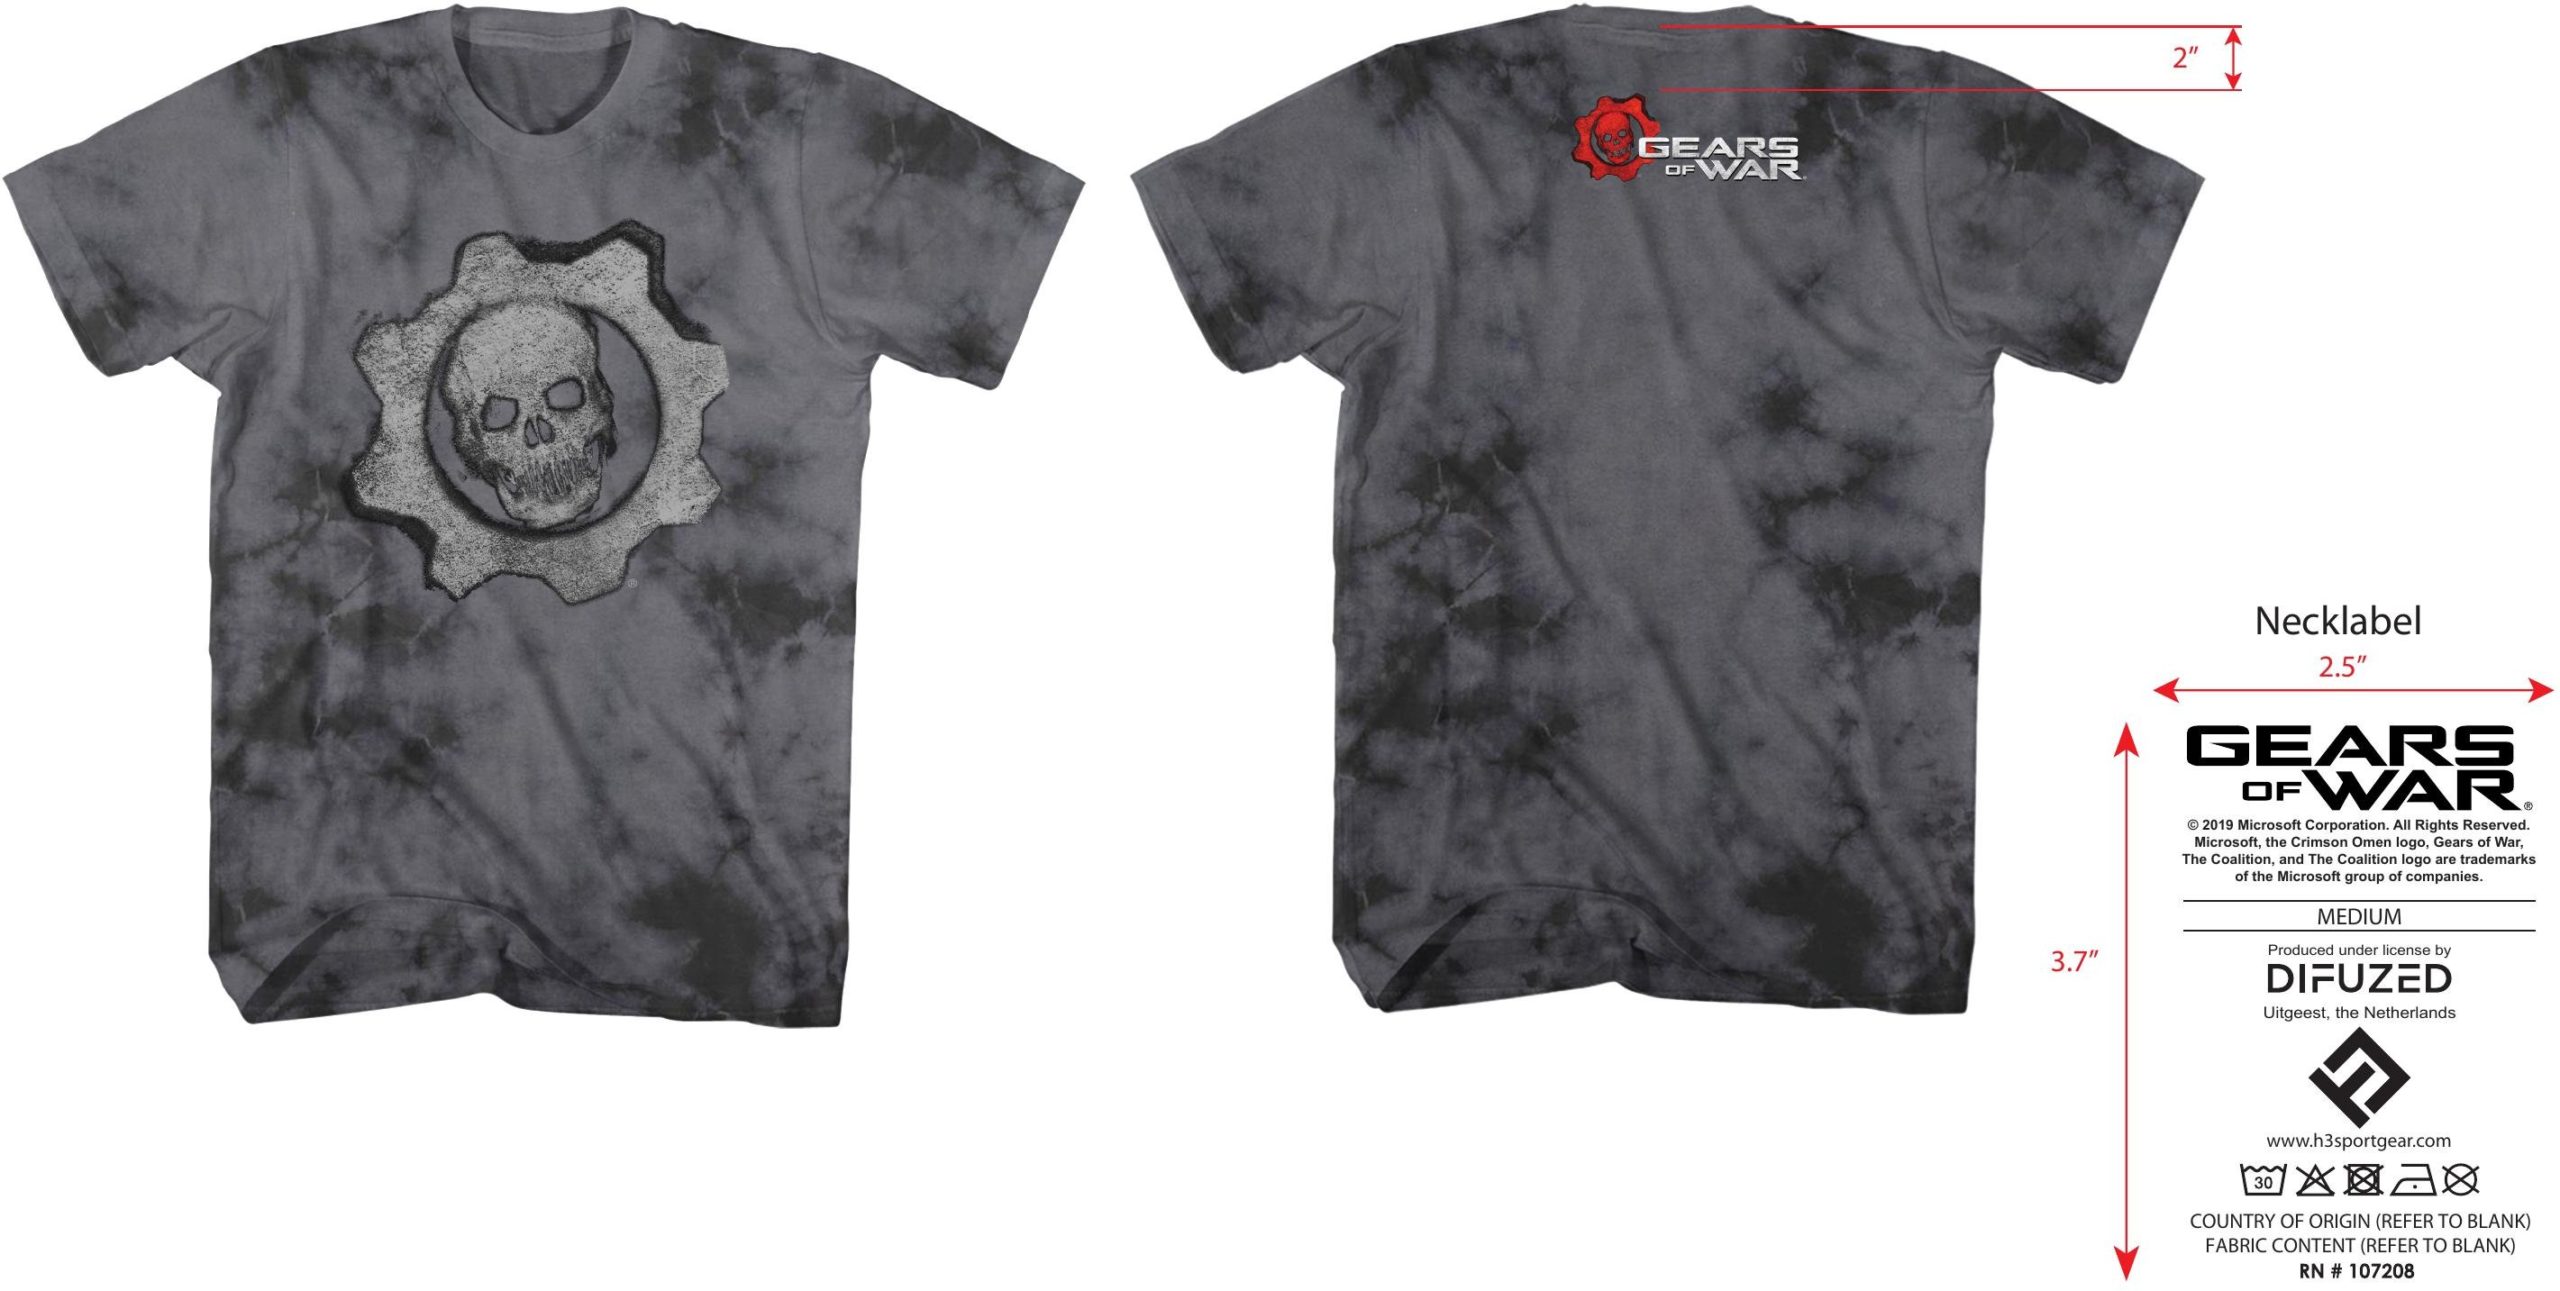 GEARS OF WAR / SOFTHAND SCREEN PRINT ON WASHED / SHORT SLEEVE T SHIRTS